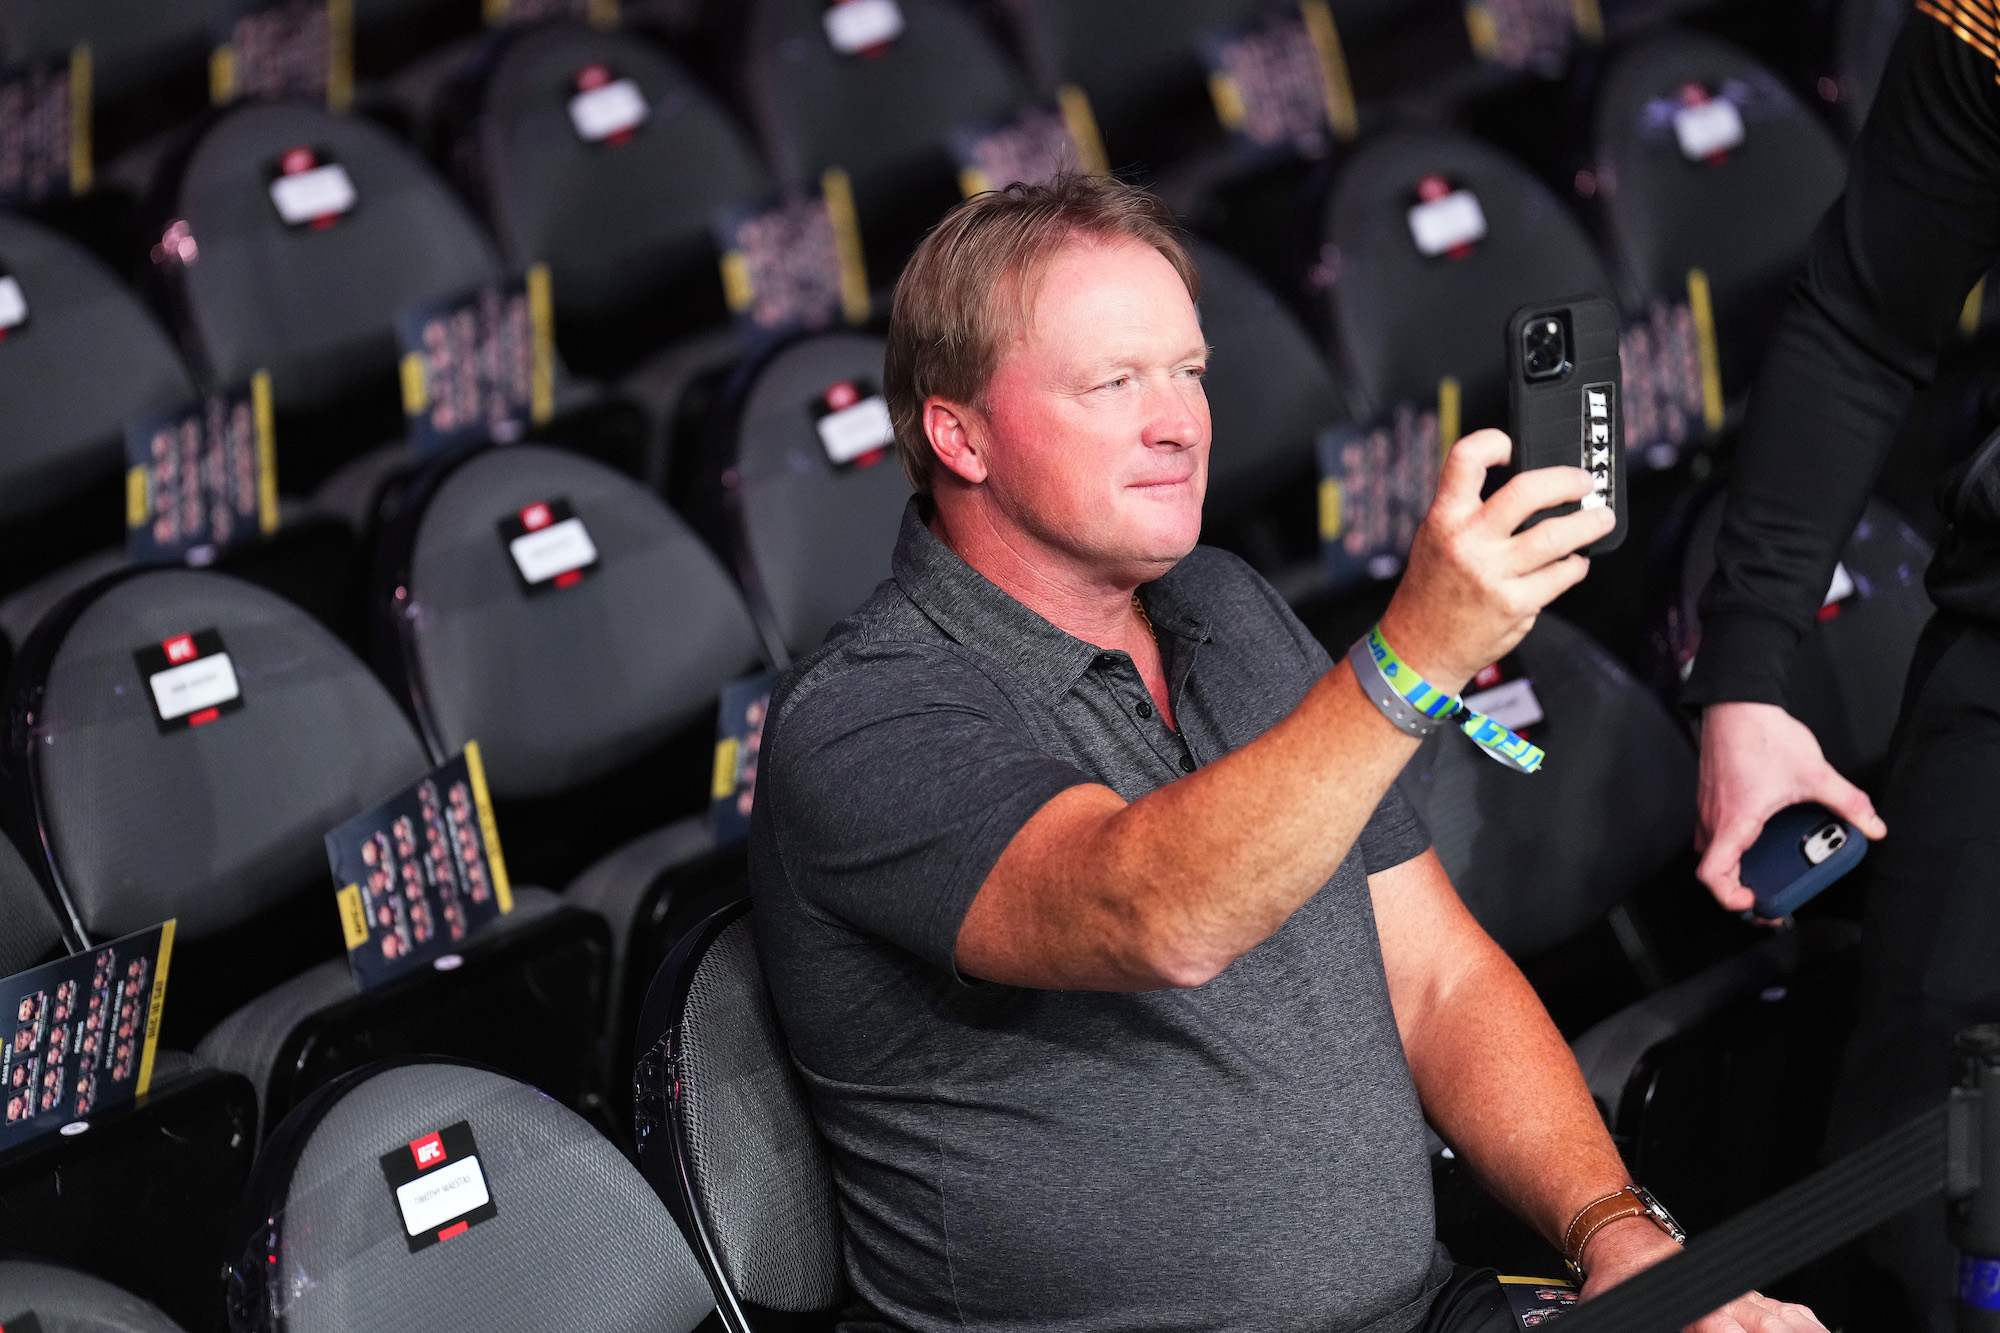 LAS VEGAS, NEVADA - DECEMBER 10: Former NFL head coach John Gruden is seen in attendance during the UFC 282 event at T-Mobile Arena on December 10, 2022 in Las Vegas, Nevada. (Photo by Chris Unger/Zuffa LLC)